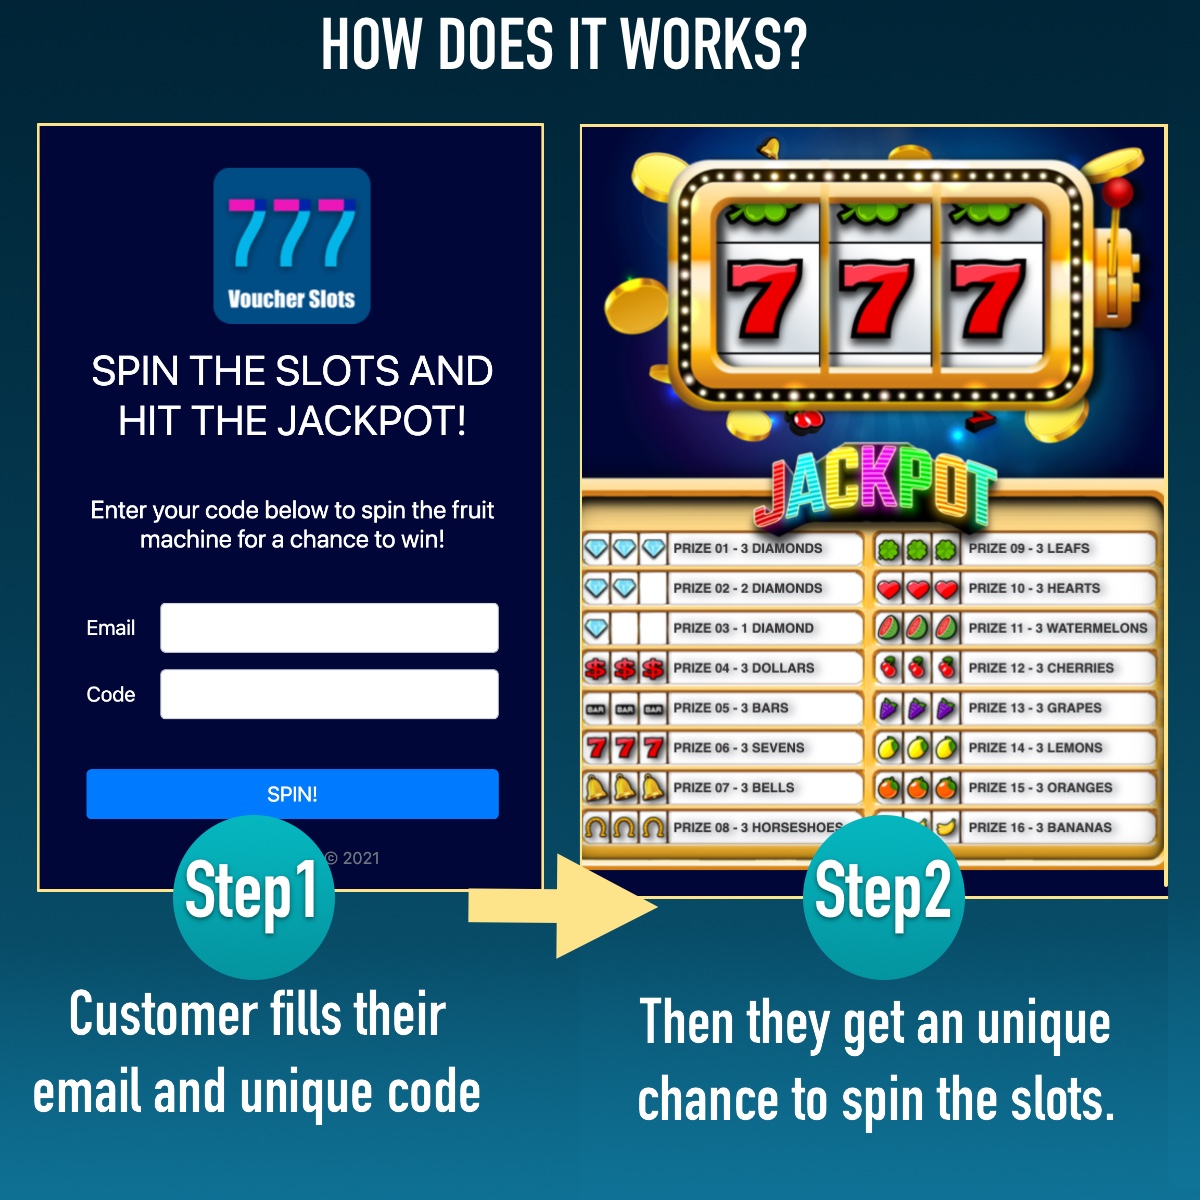 Voucher Slots - Engage and give prizes to your customers - 1